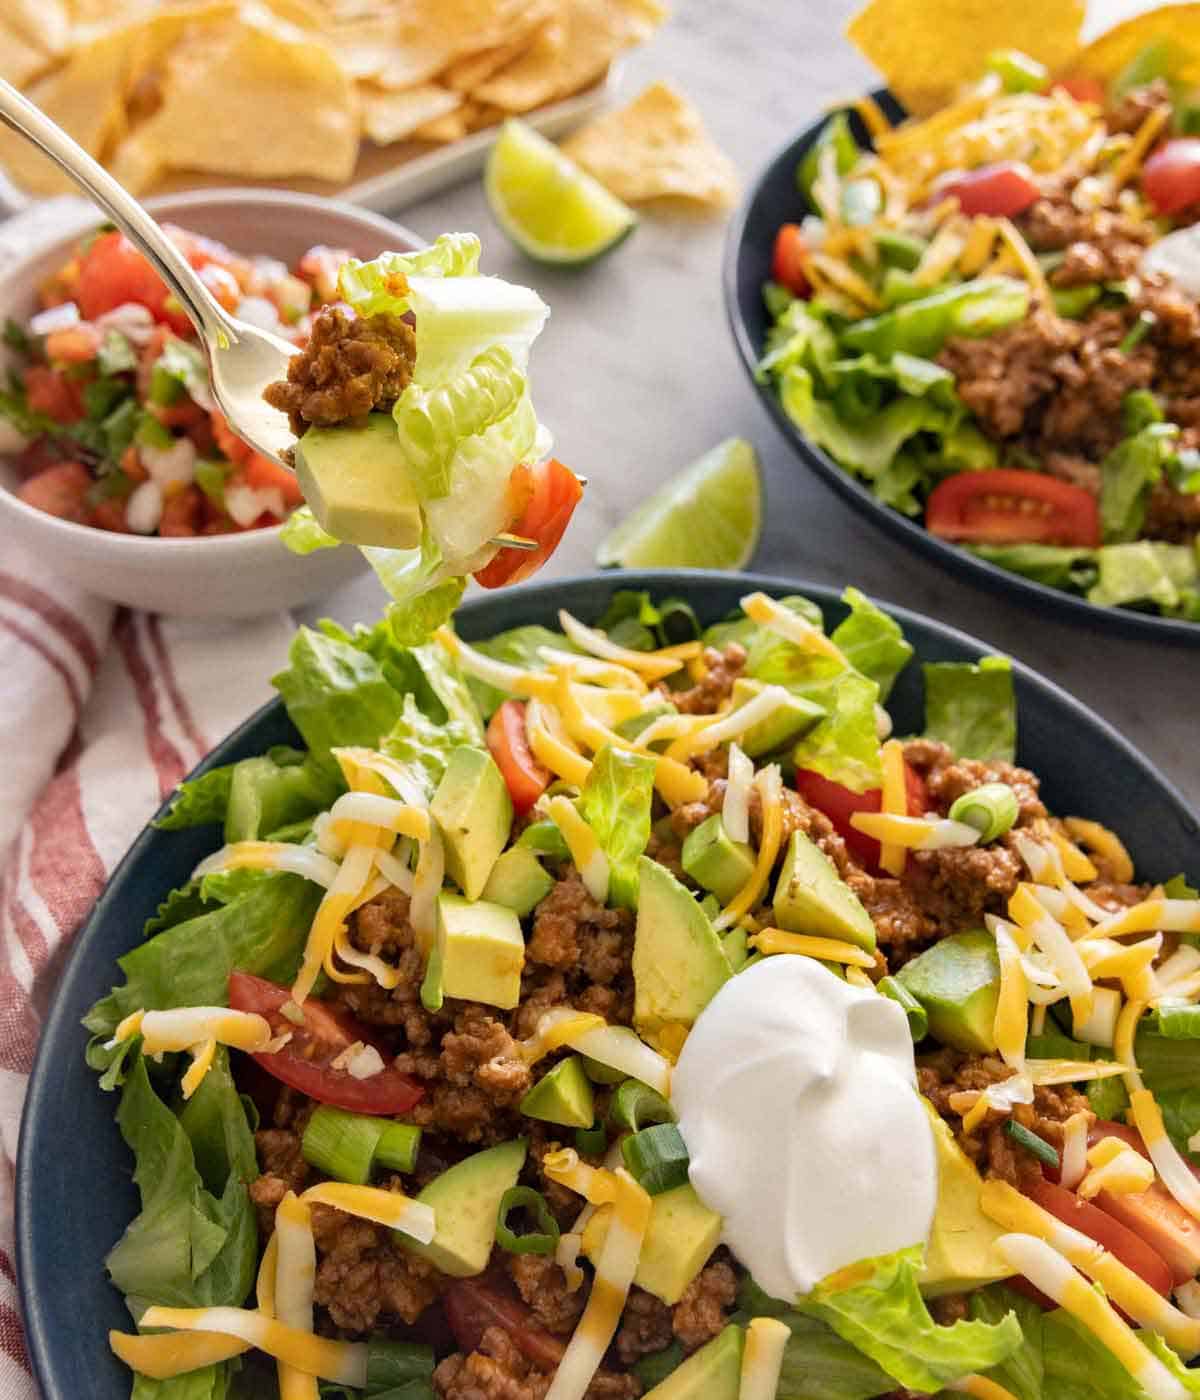 A forkful of taco salad lifted from a bowl with another bowl in the background.